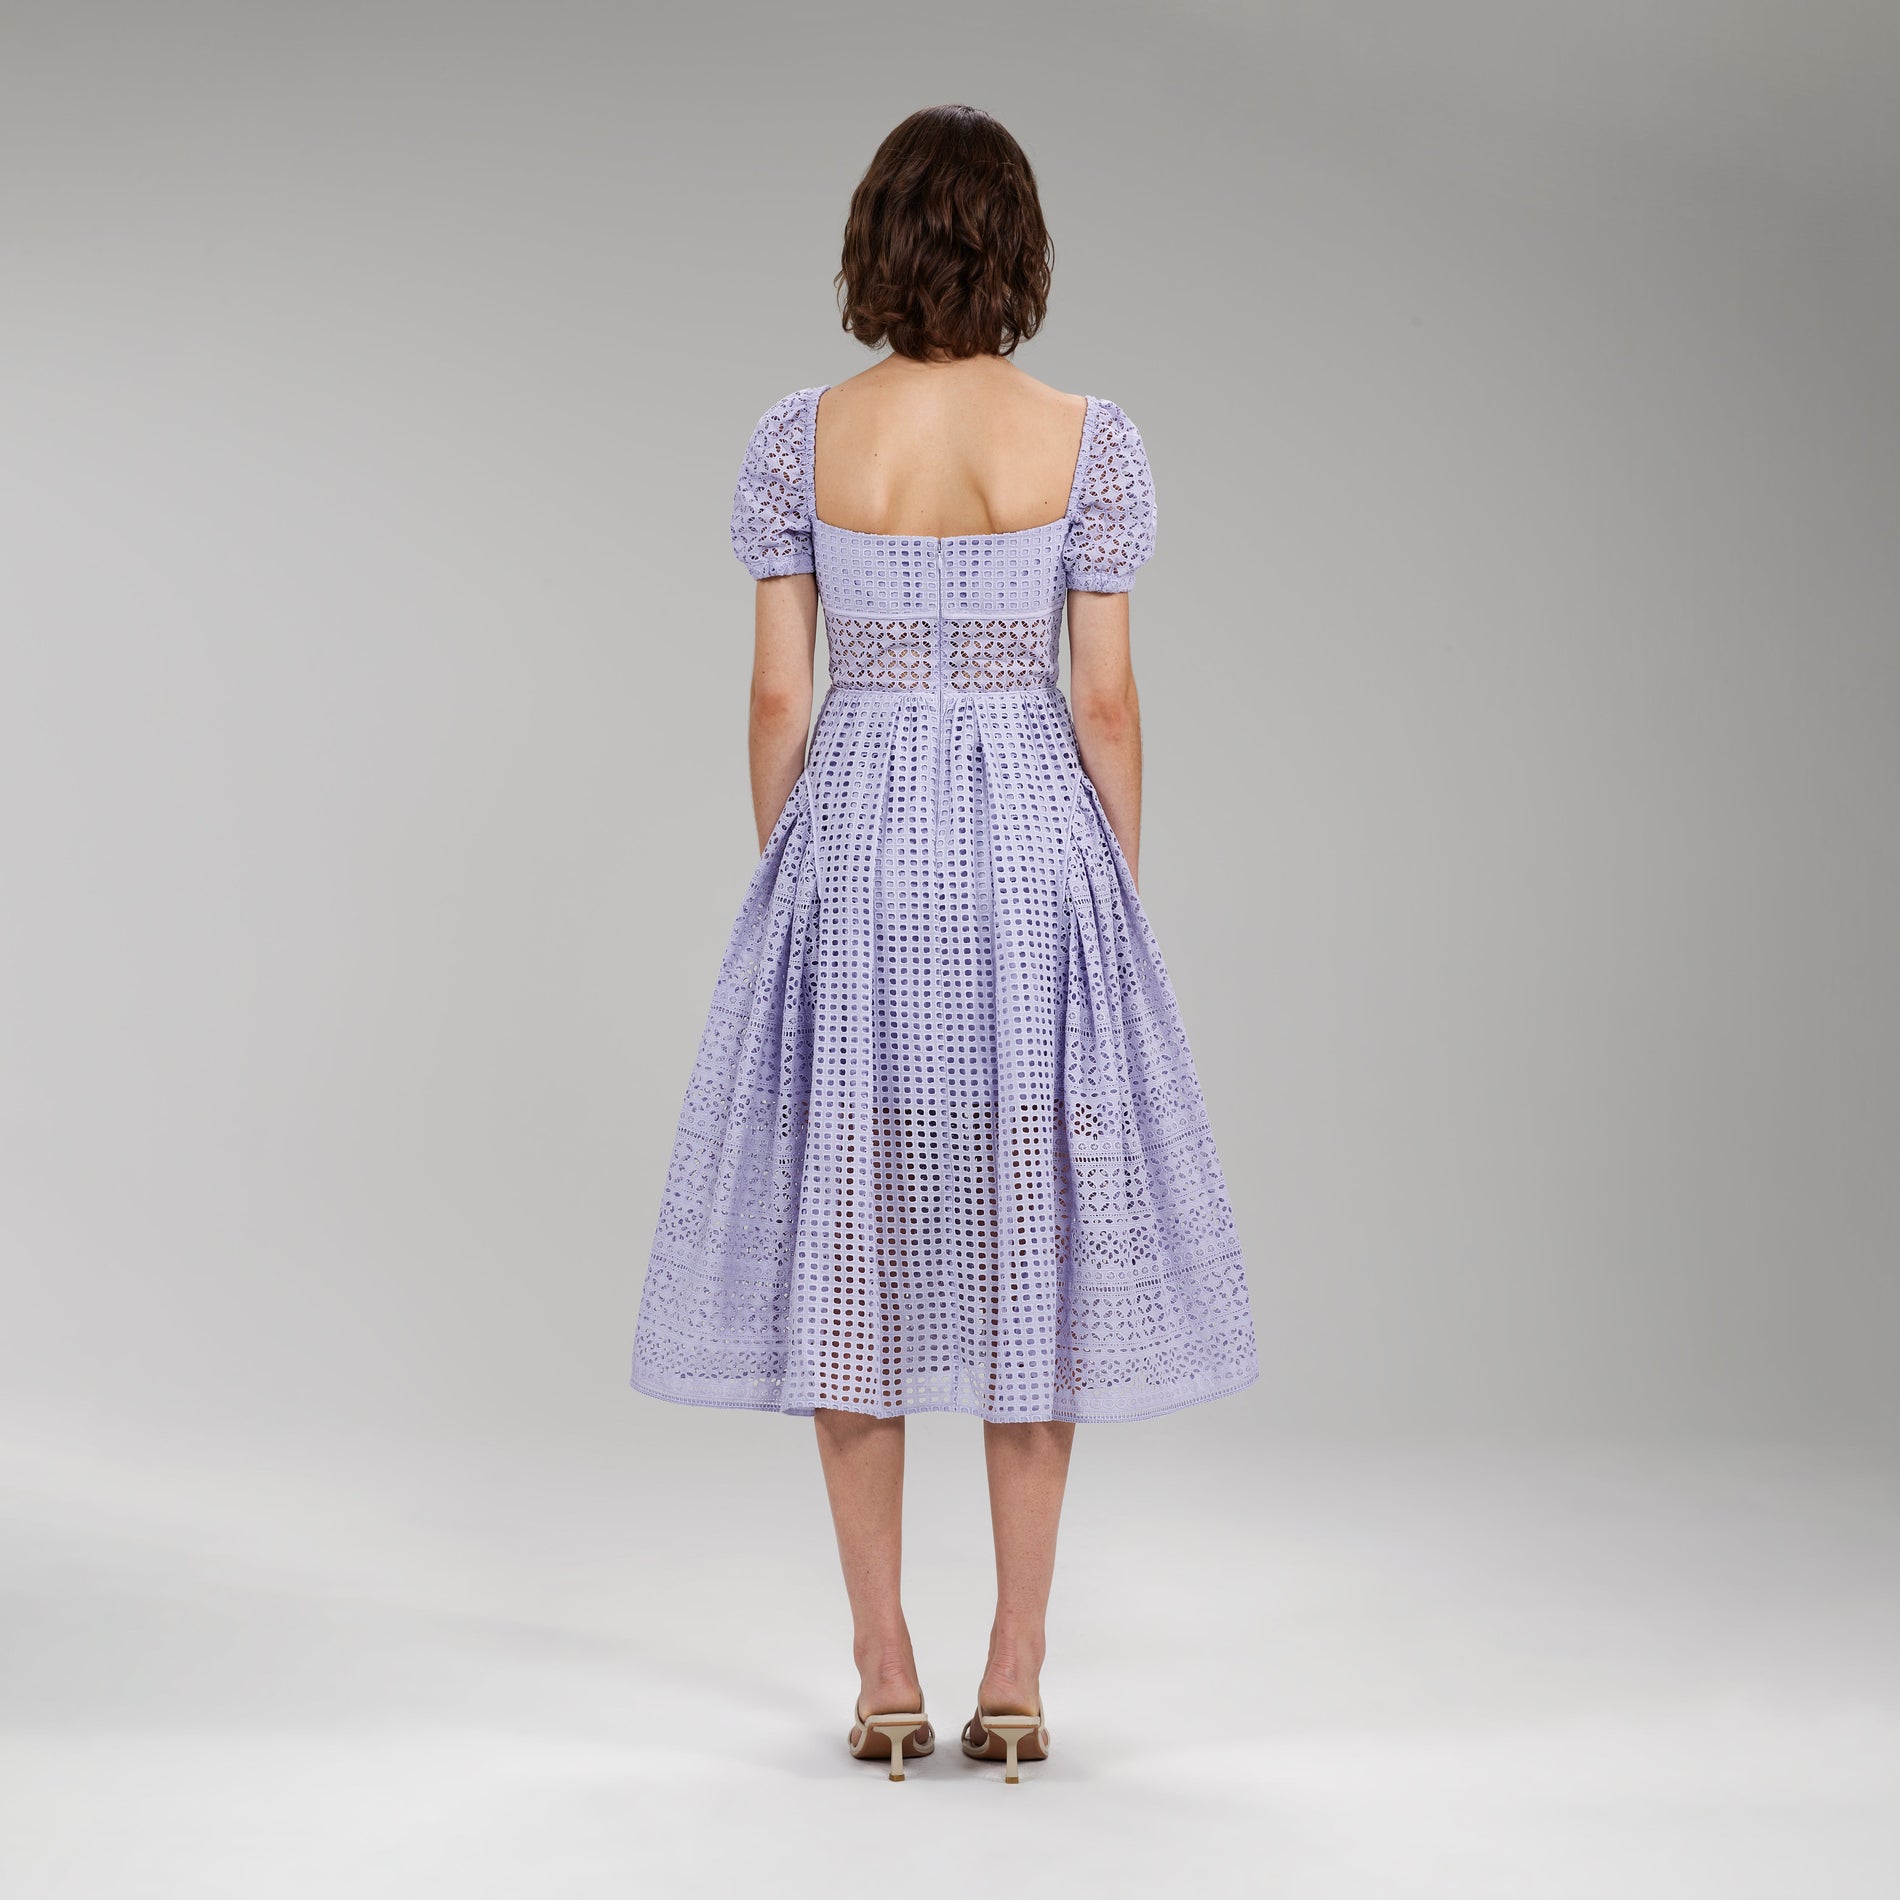 A woman wearing the Lilac Cotton Broderie Anglaise Midi Dress